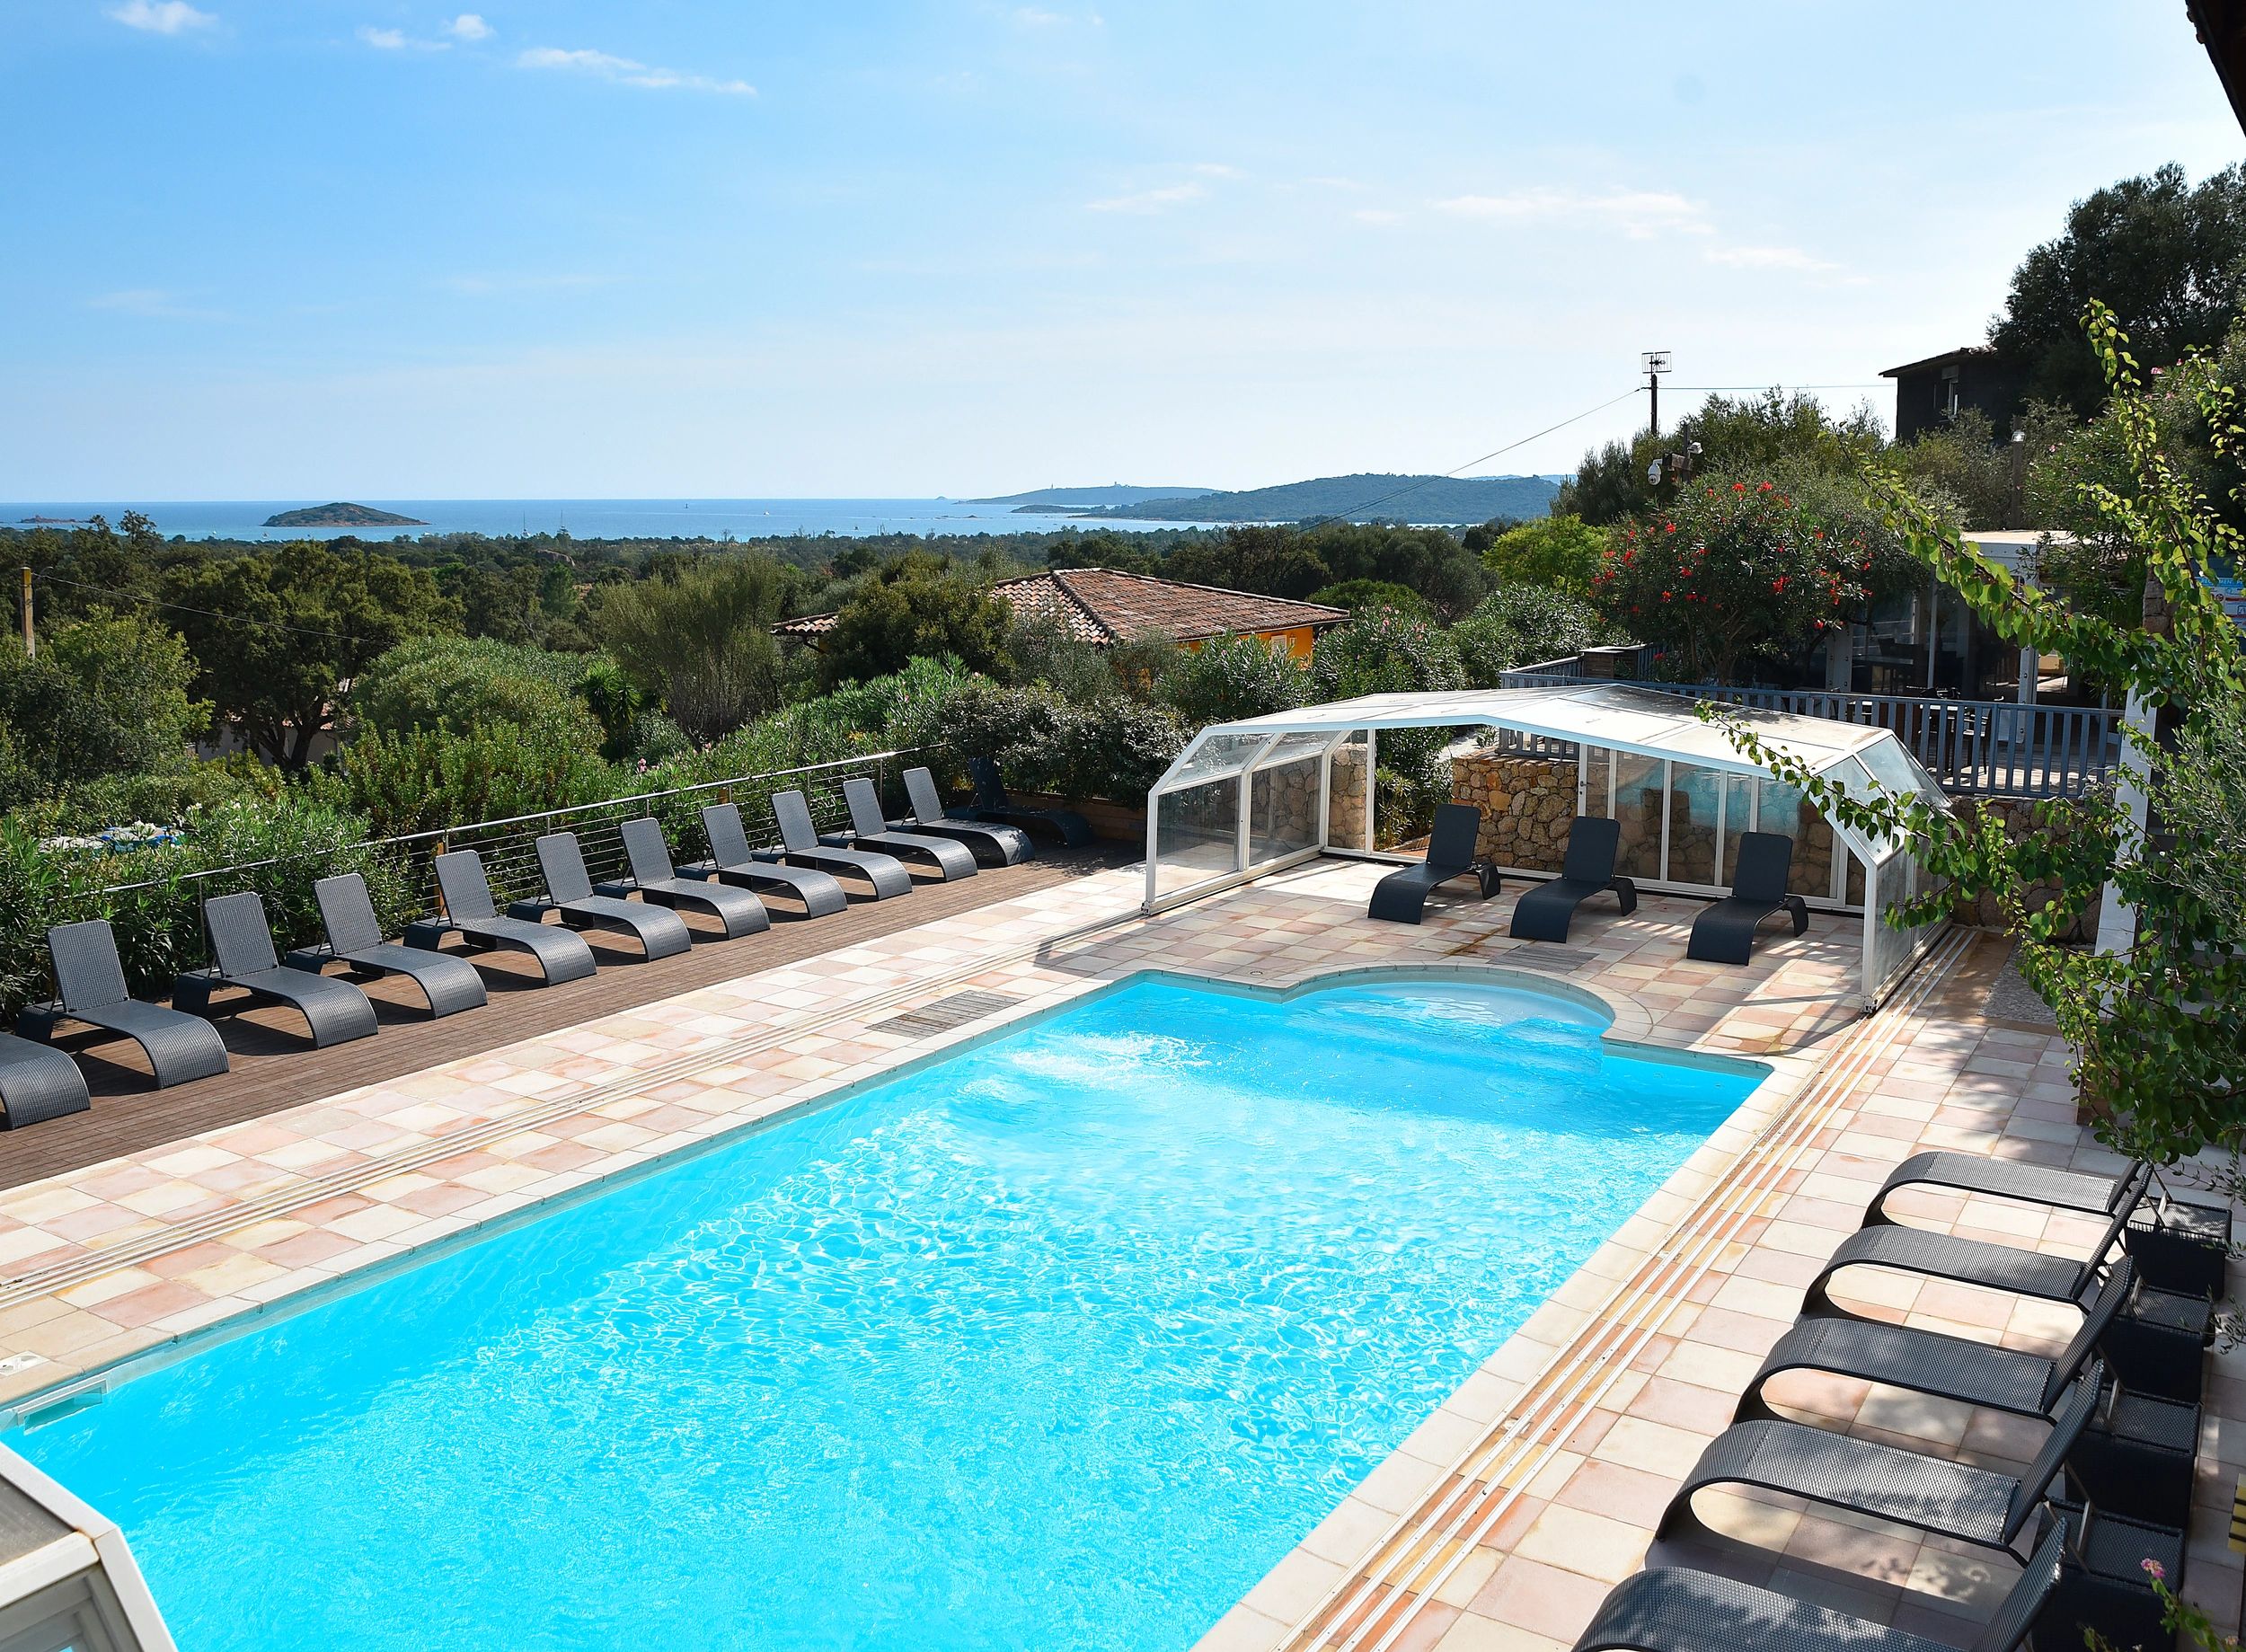 The covered pool of the 4-star residence in Porto-Vecchio